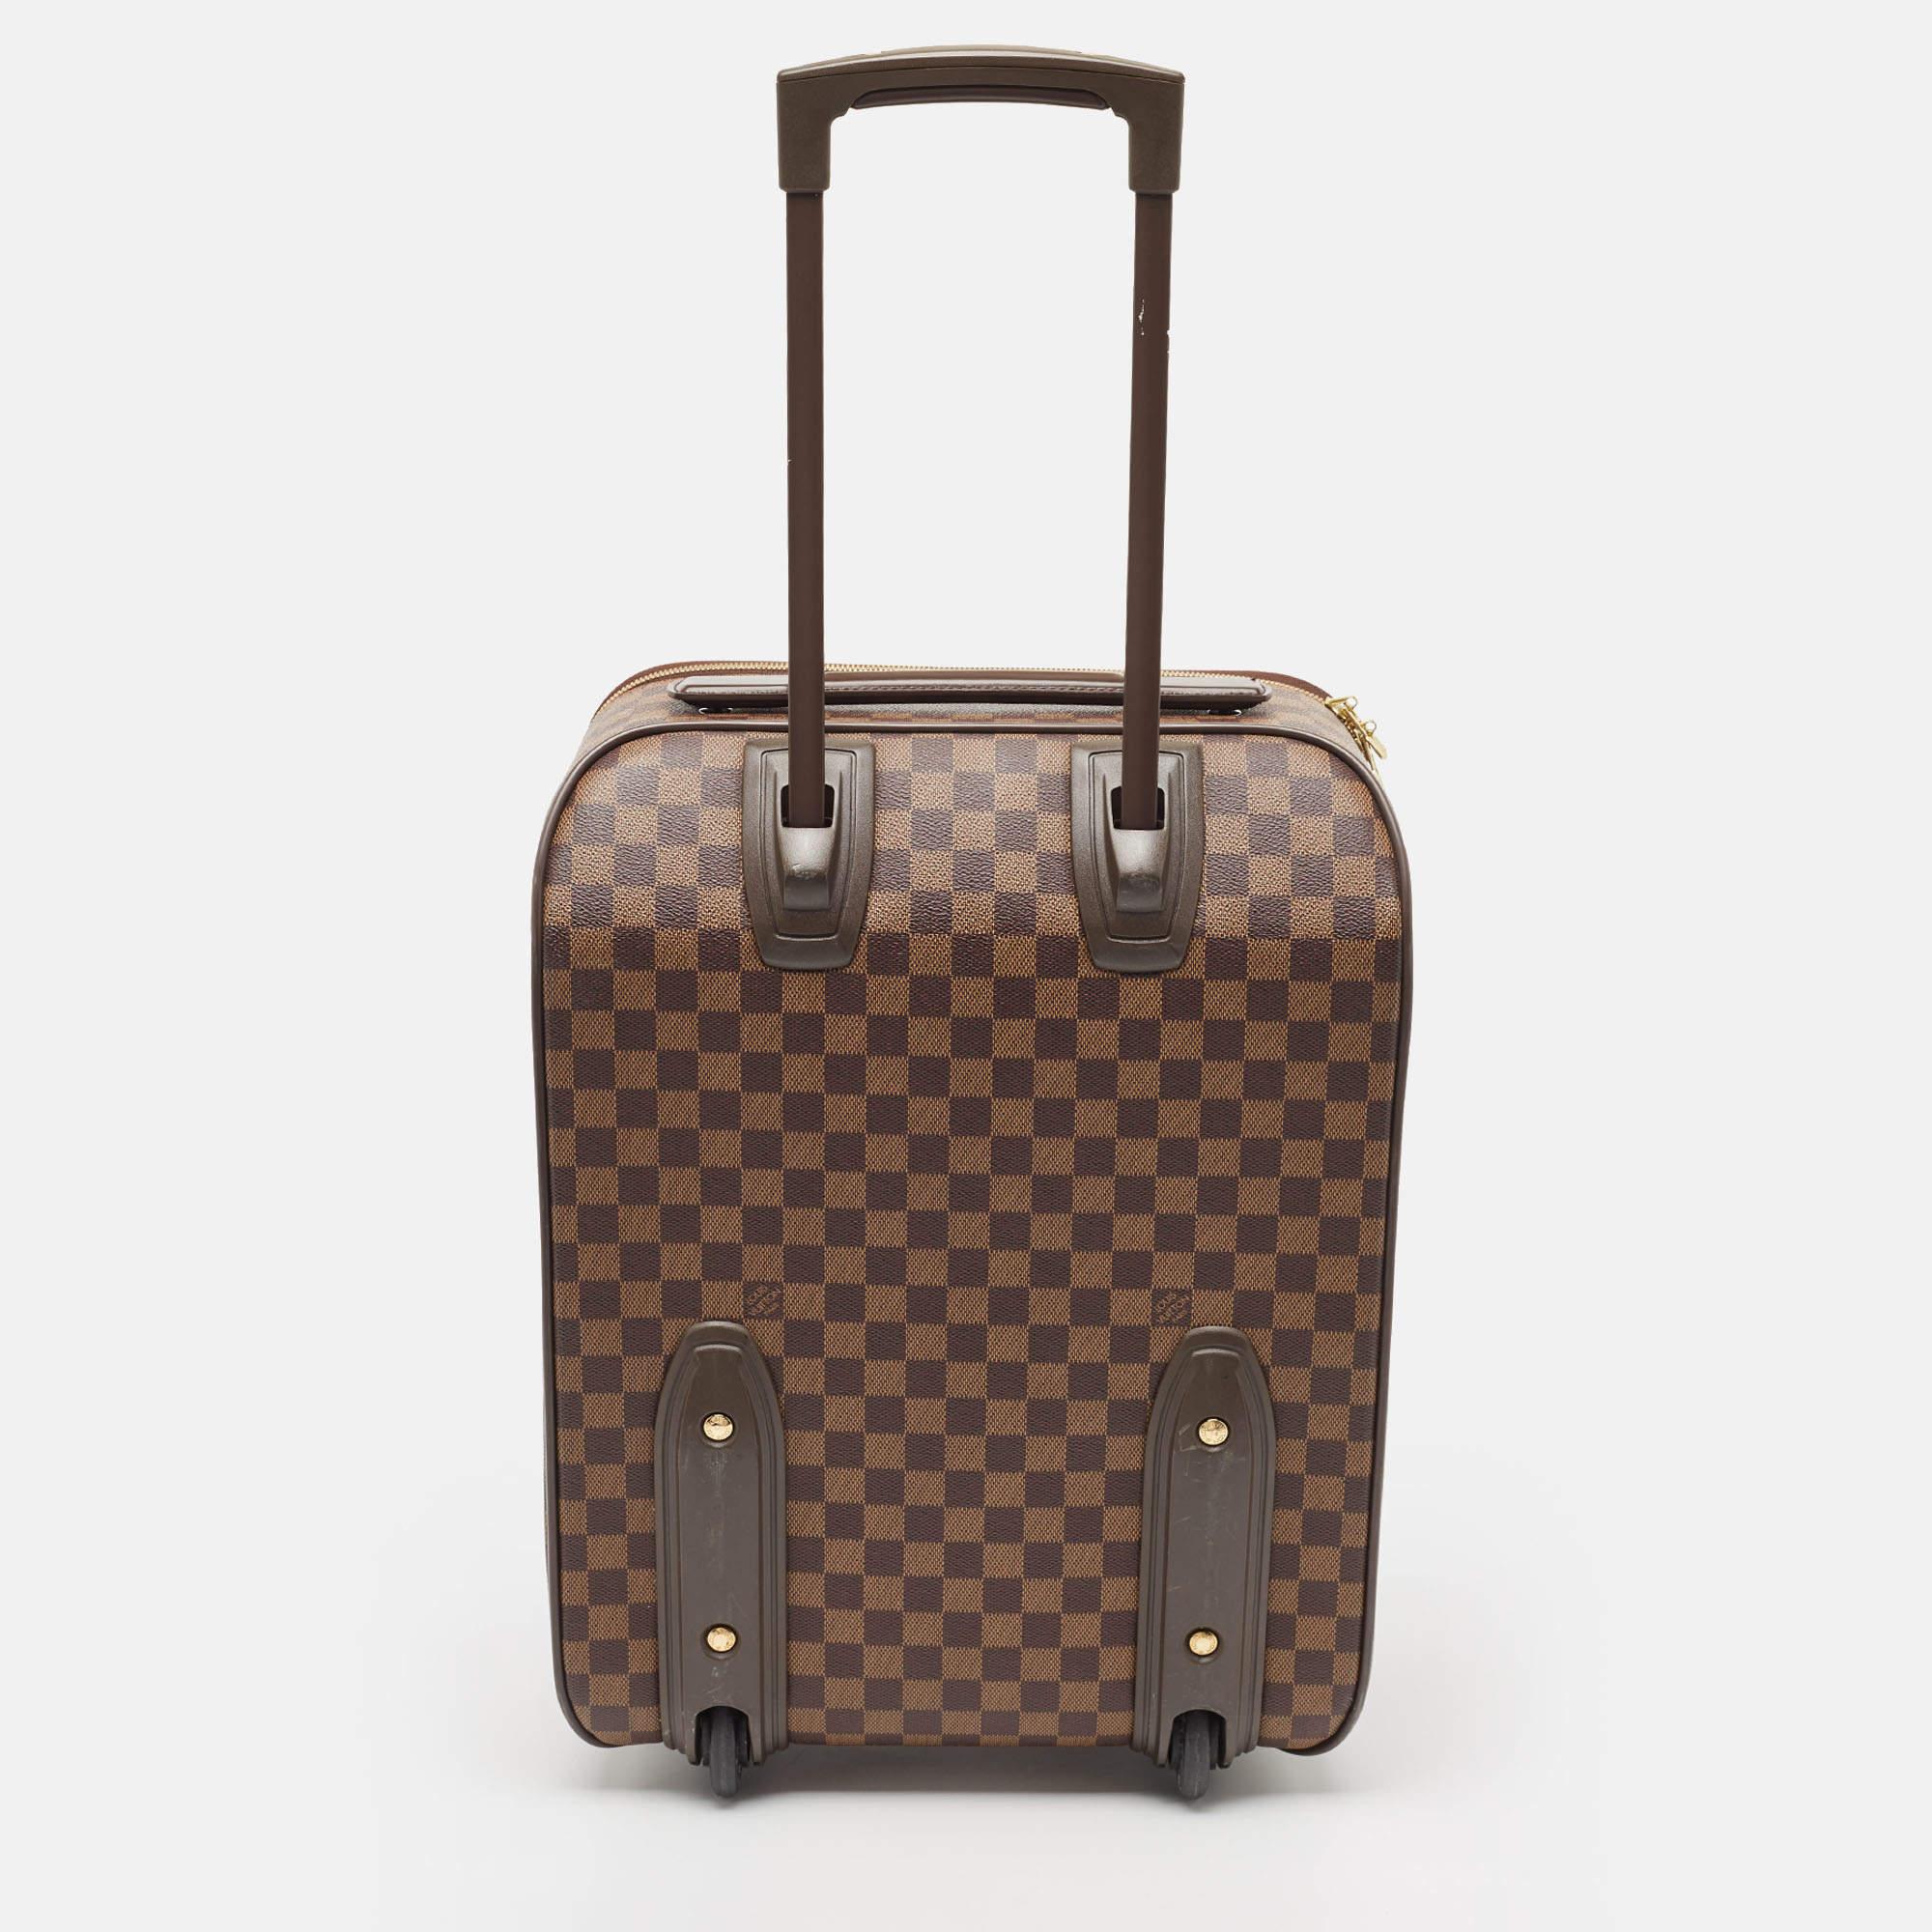 A traveling partner to trust and treasure is this one from Louis Vuitton. The exterior has been crafted from Damier Ebene canvas while the spacious interior is lined with nylon. The case is functional and reliable.

Includes: Padlock & Key